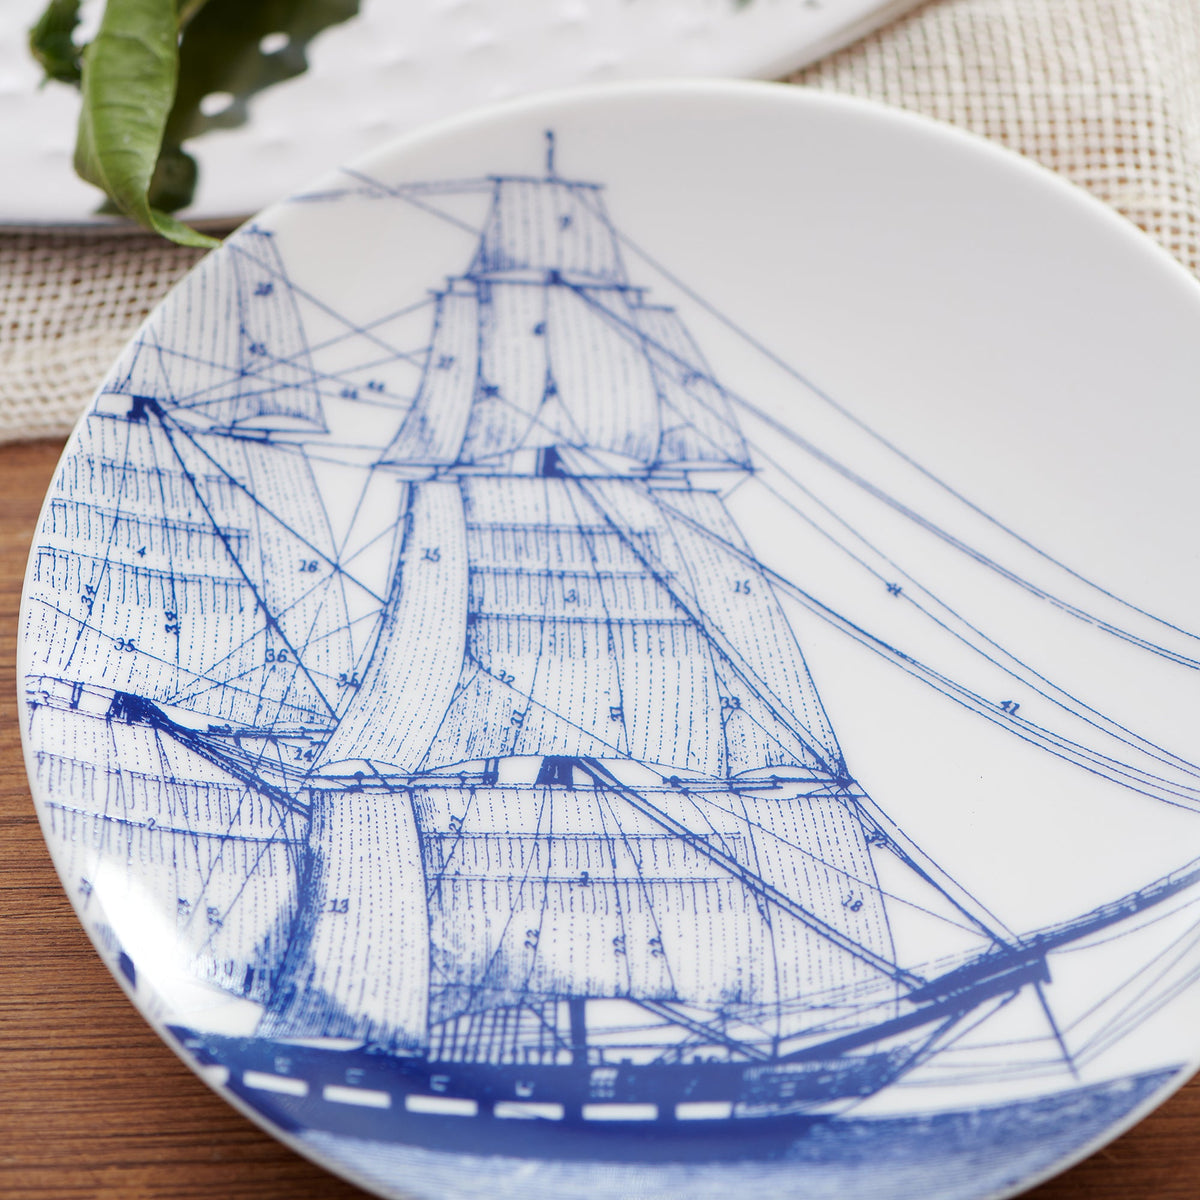 A Rigging Canapé Plate by Caskata Artisanal Home, featuring a detailed drawing of a wood ship, perfect for showcasing nautical heritage.